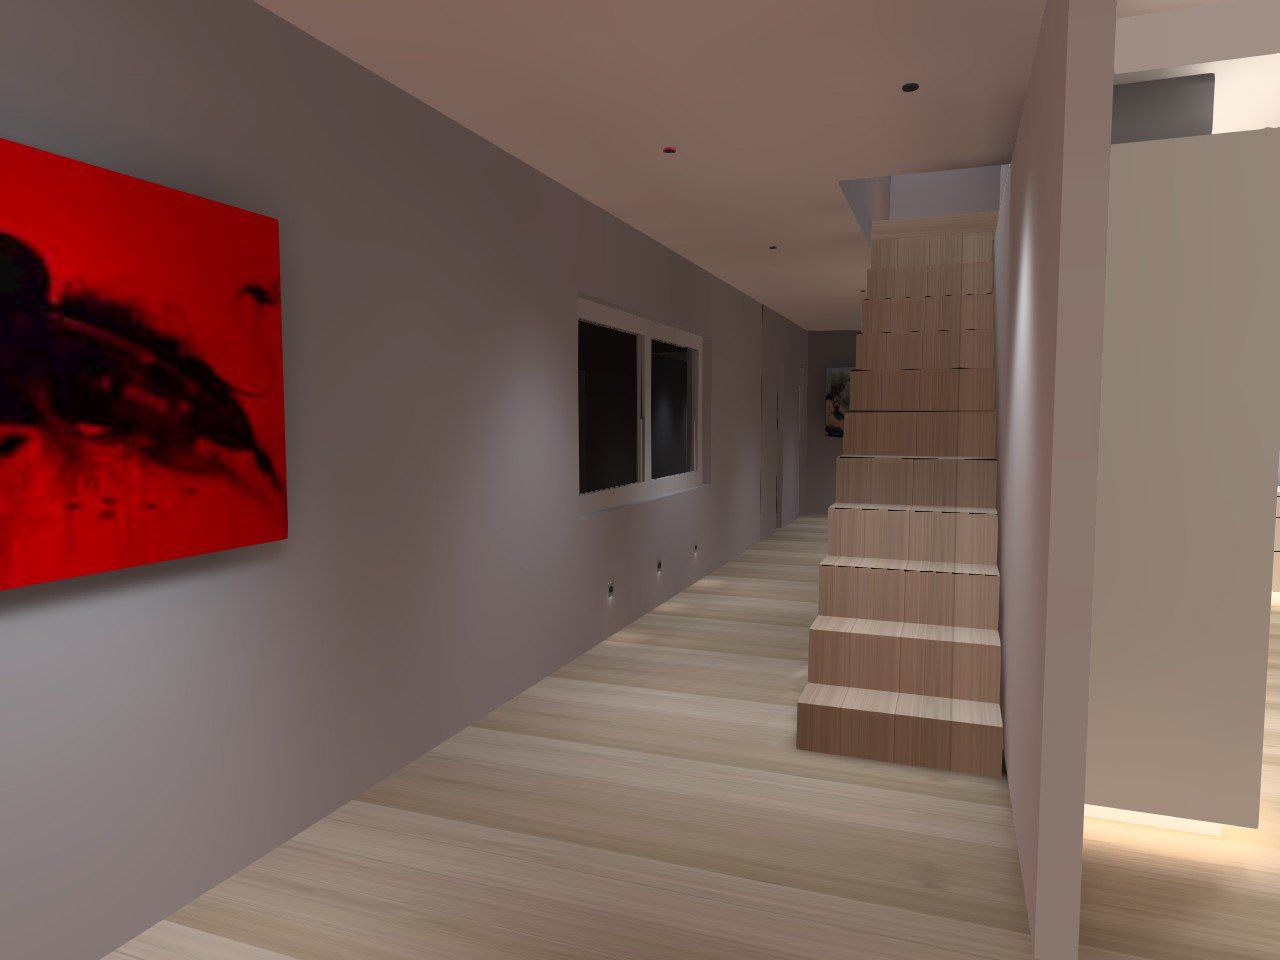 3D Render of Ground Floor Entrance Hall and Stairs to 1st Floor